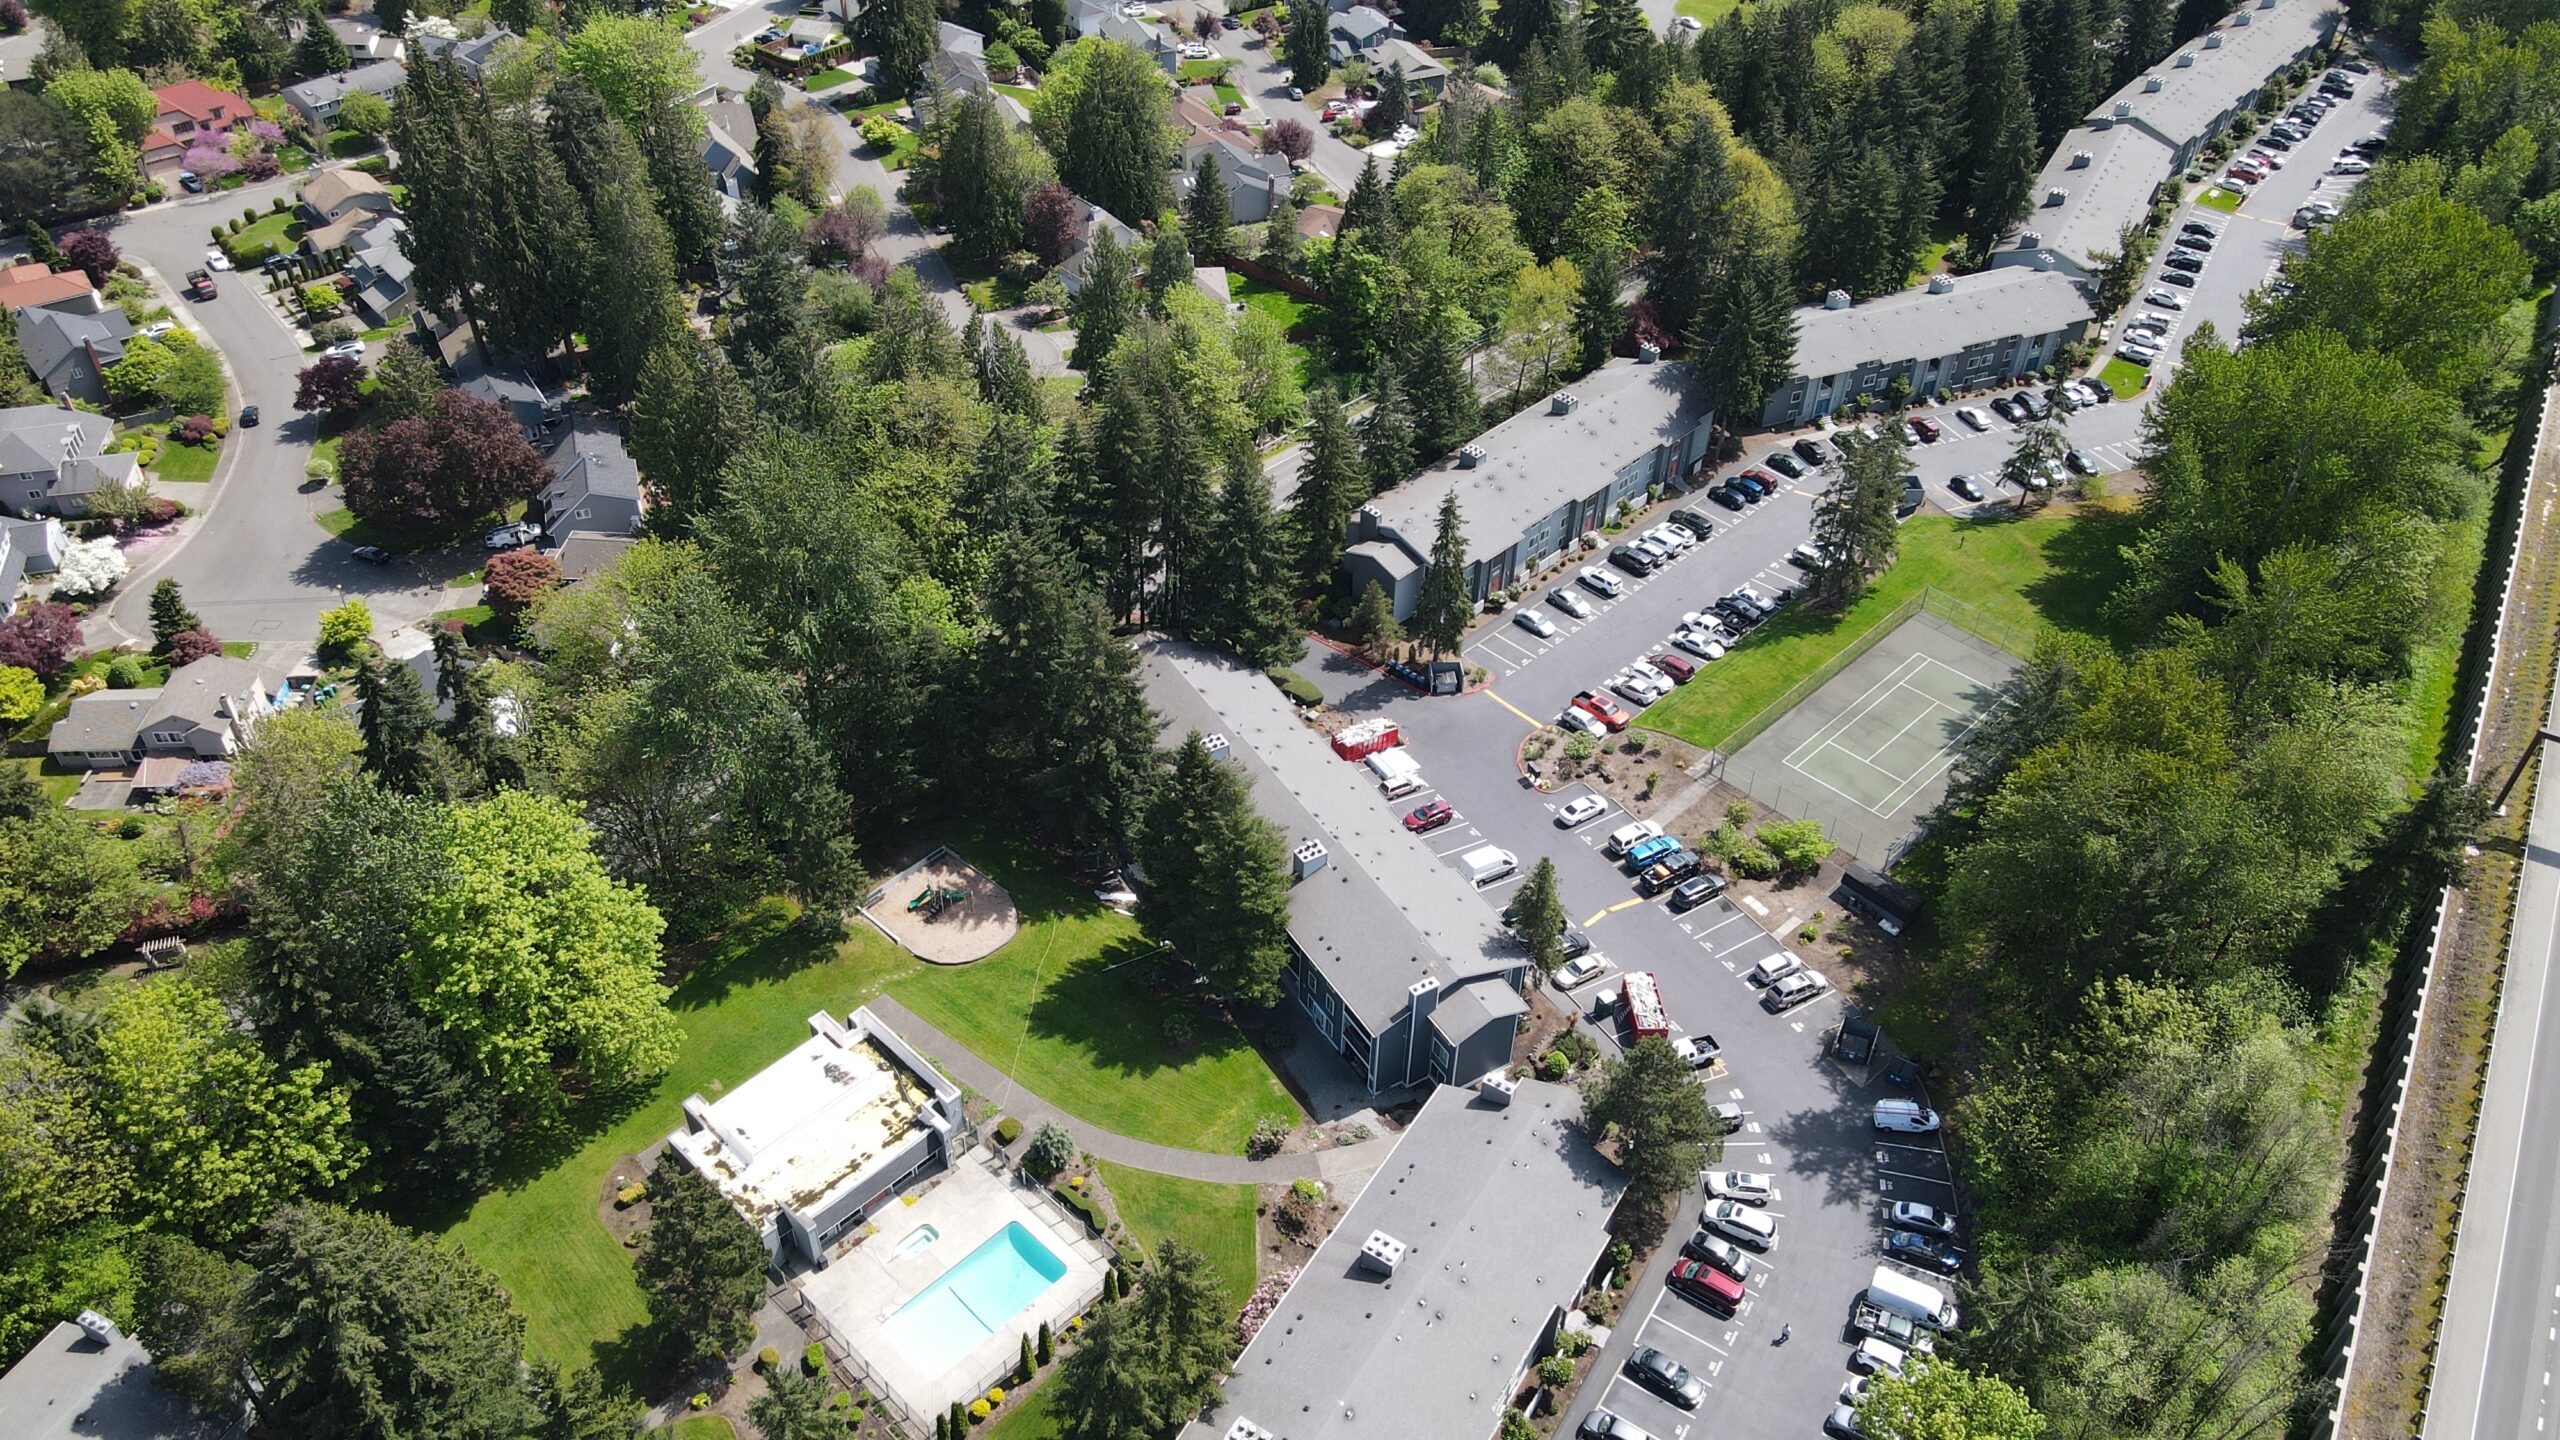 Ariel view of a condo complex, pool and parking lot